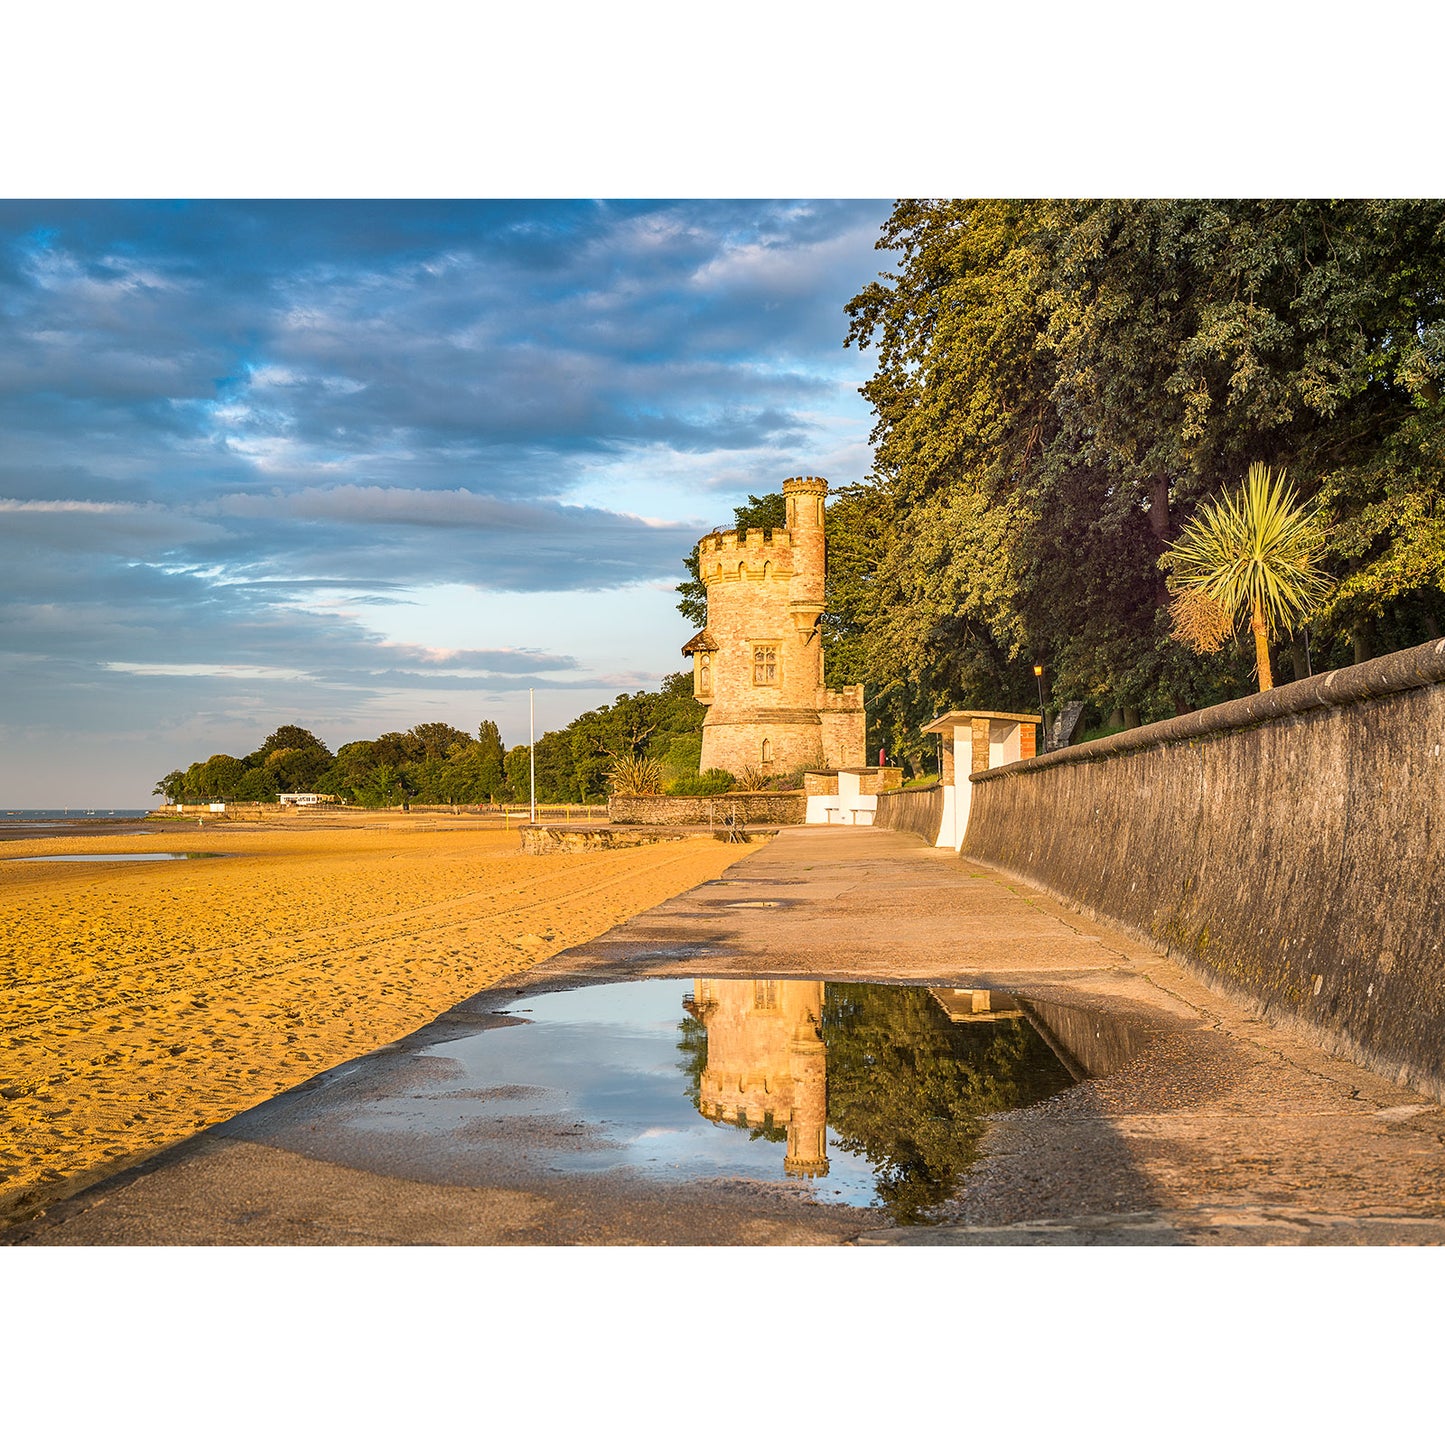 A historic Appley Tower overlooking a sandy beach with a seawall at the Isle of Gascoigne at sunset by Available Light Photography.